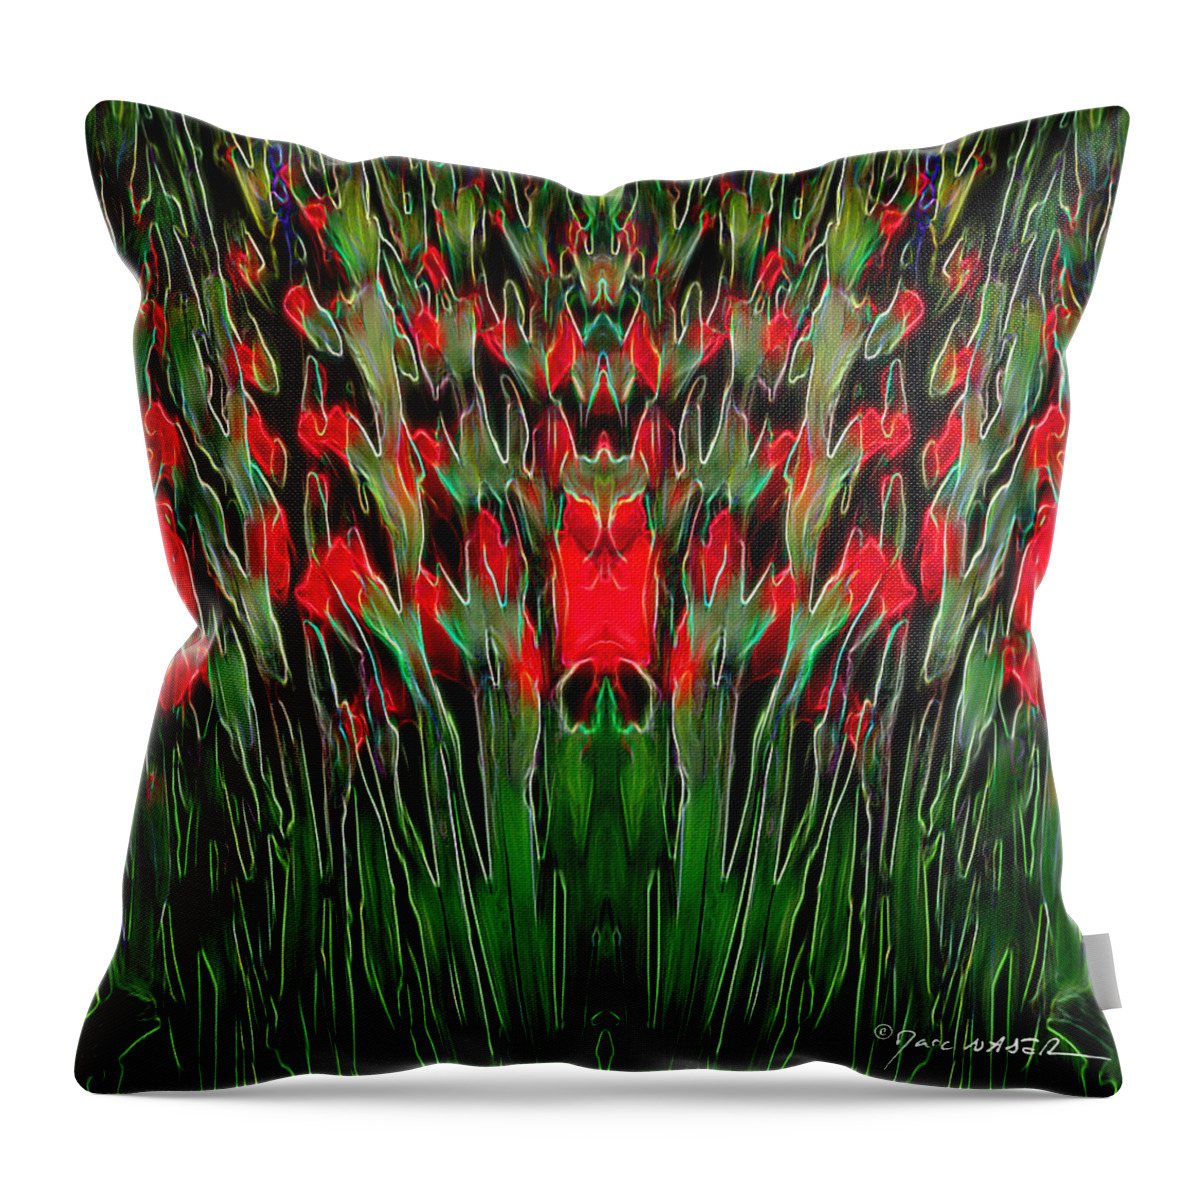 Marc Nader Photo Art Throw Pillow featuring the photograph Dance Of The Budding Irises by Marc Nader